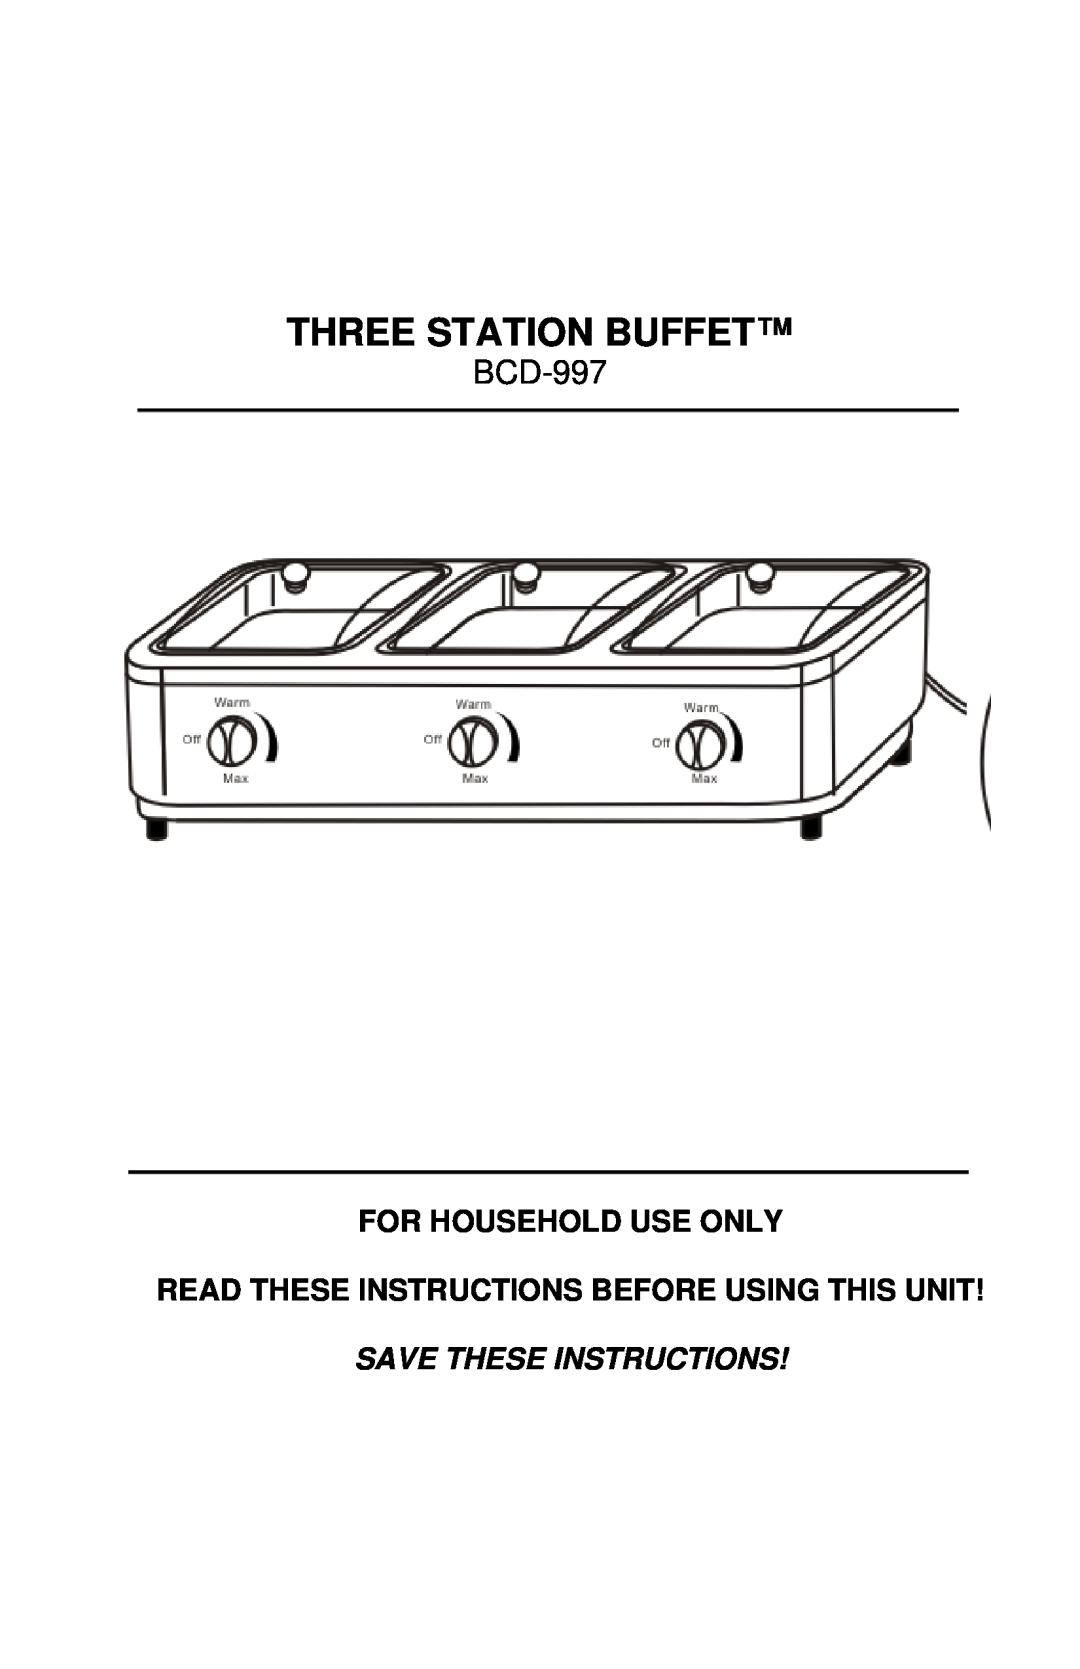 Nostalgia Electrics BCS-997 manual Three Station Buffet, BCD-997, For Household Use Only, Save These Instructions 